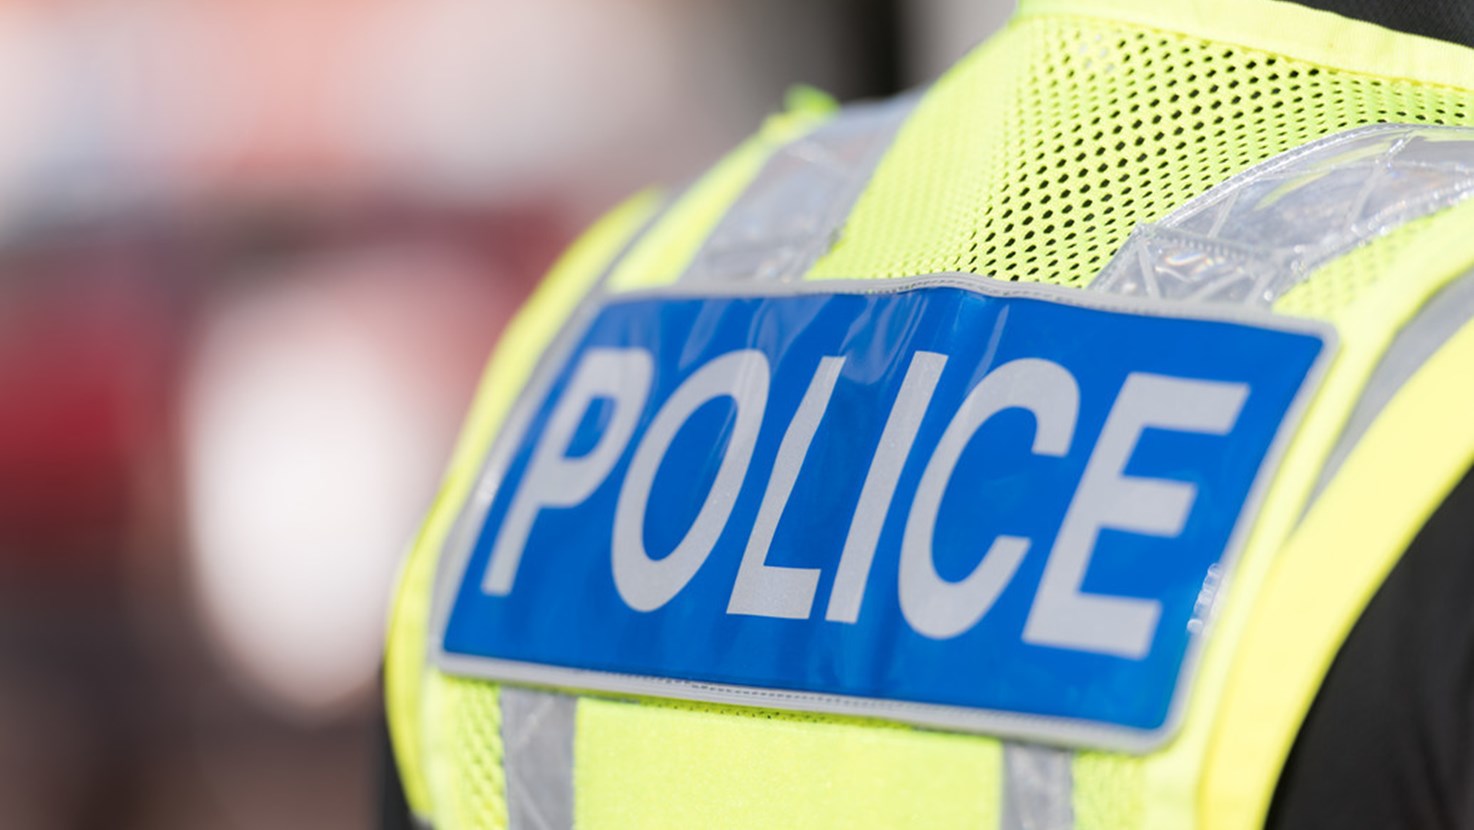 PCC secures an extra £3.8m funding from the Government for recruitment of new police officers